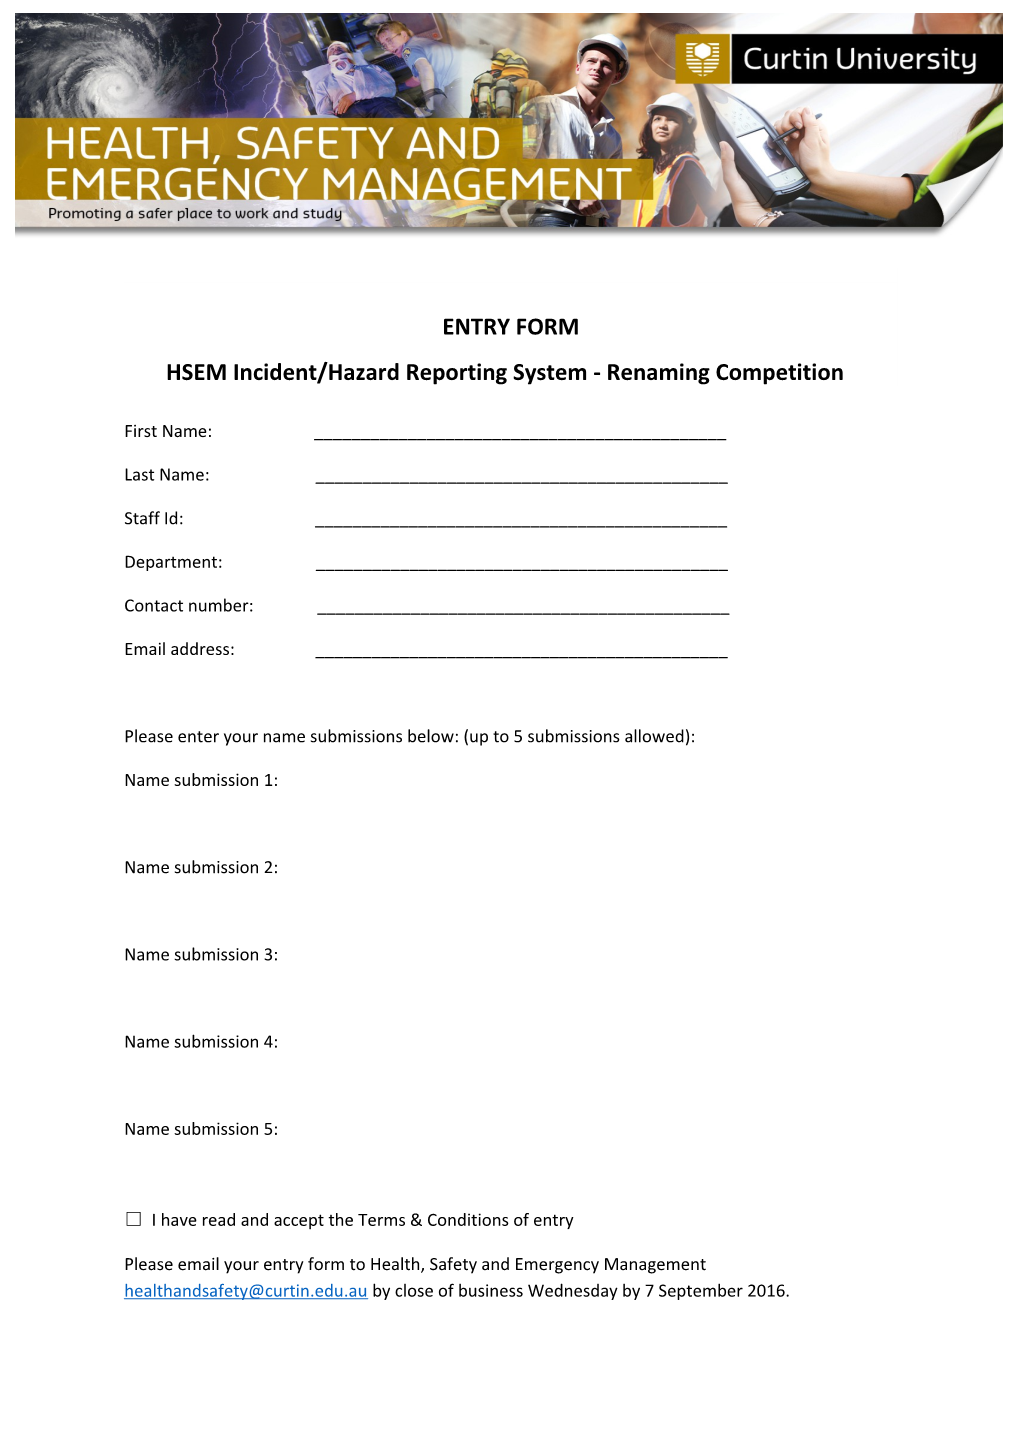 ENTRY FORM HSEM Incident/Hazard Reporting System - Renaming Competition